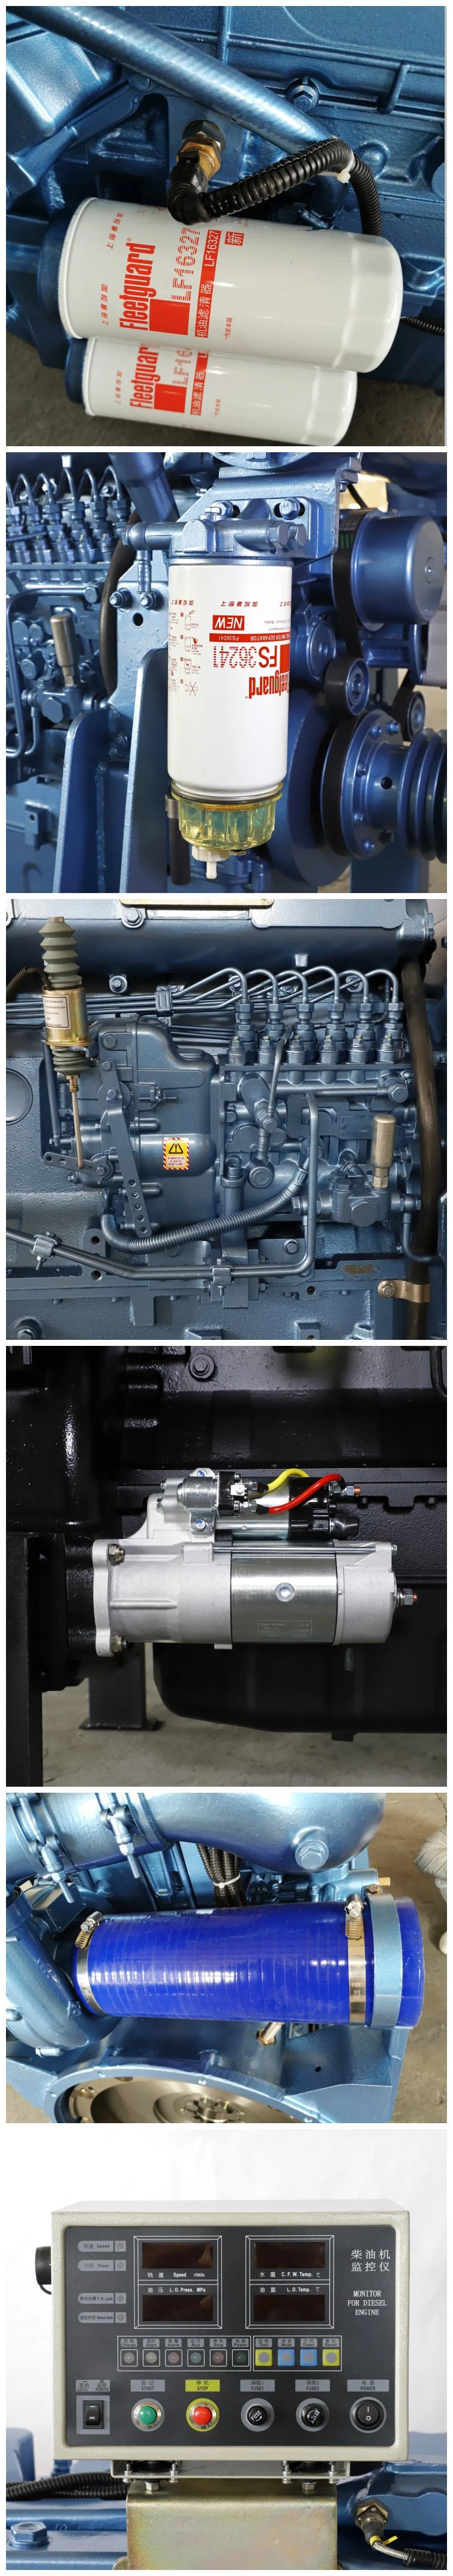 Marine Diesel Engine for Boats and Ships 6 Cylinders 4 Stroke Direct Injection Rated Power 400HP